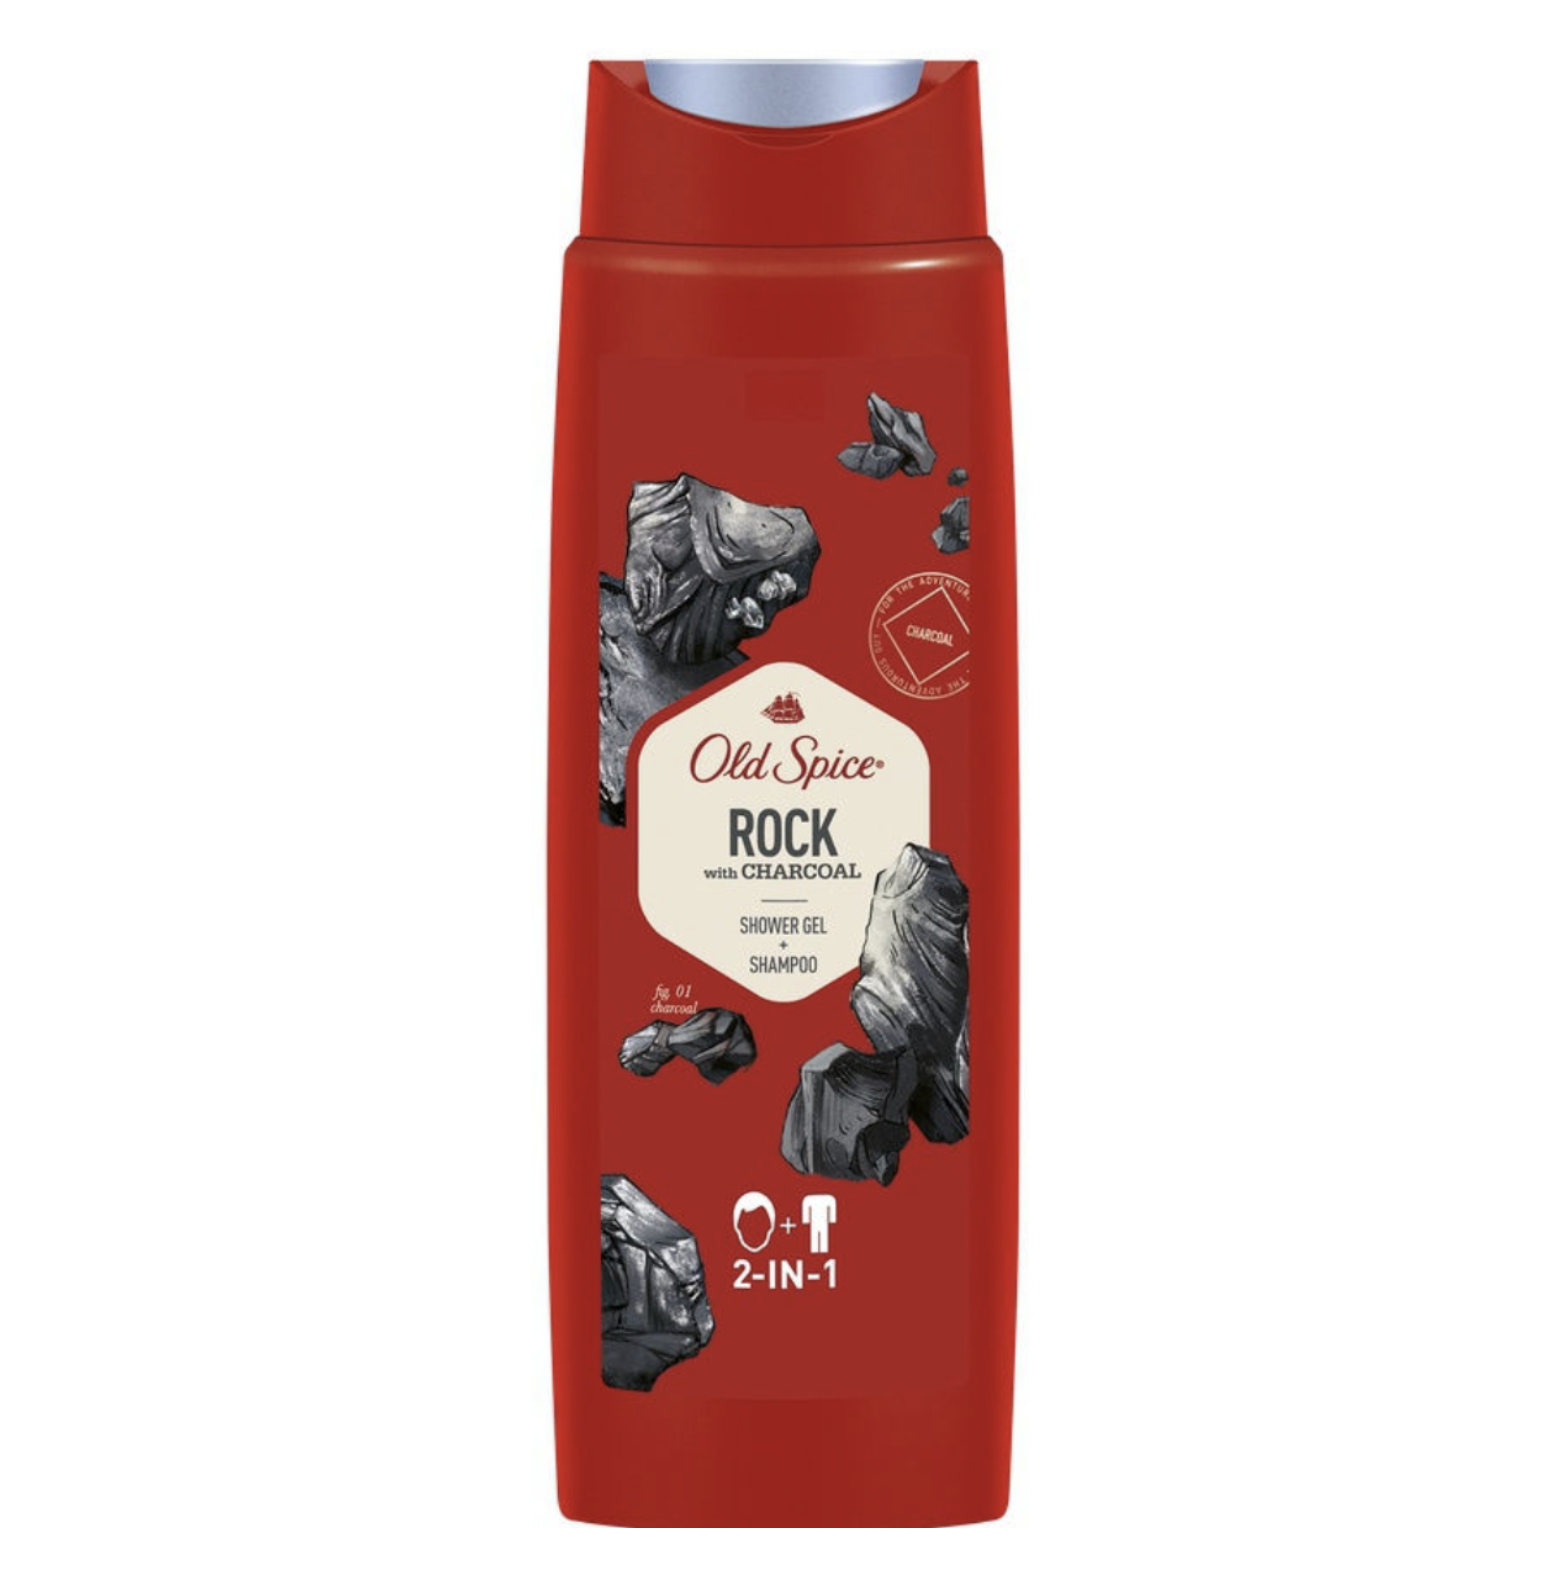    / Old Spice Rock With Charcoal -      21  250 